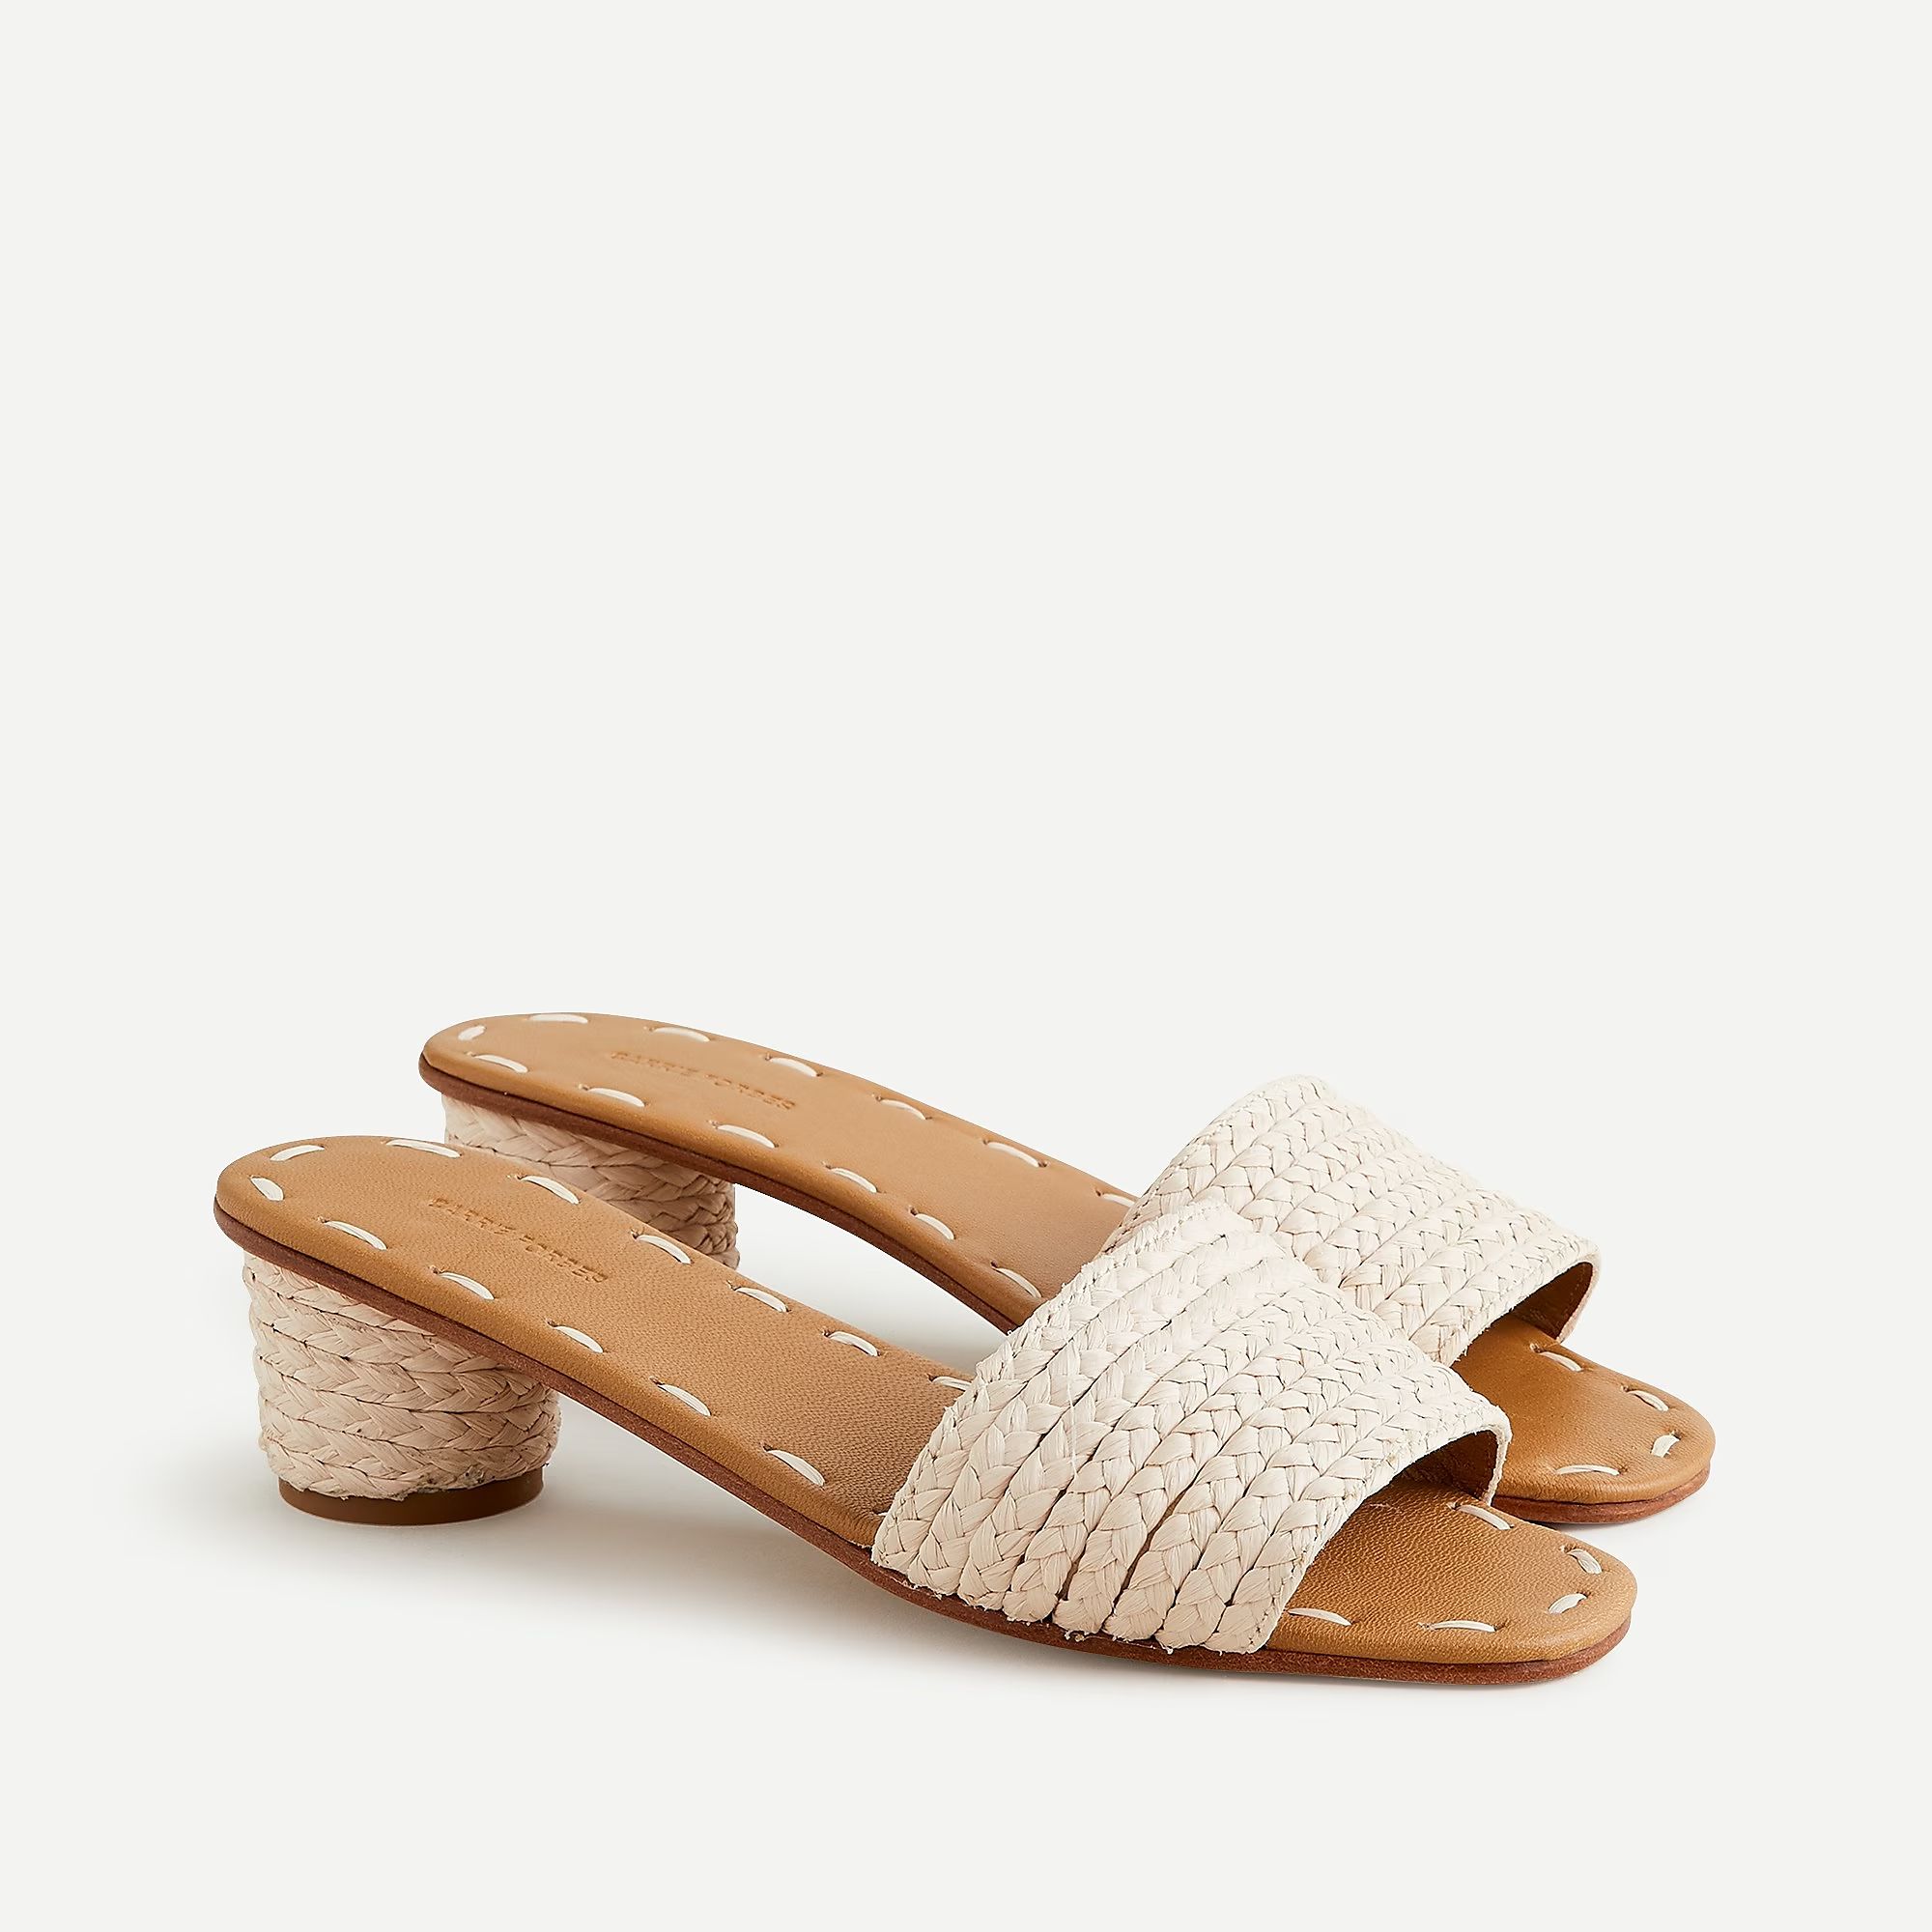 Carrie Forbes X J.Crew Bou sandals | J.Crew US